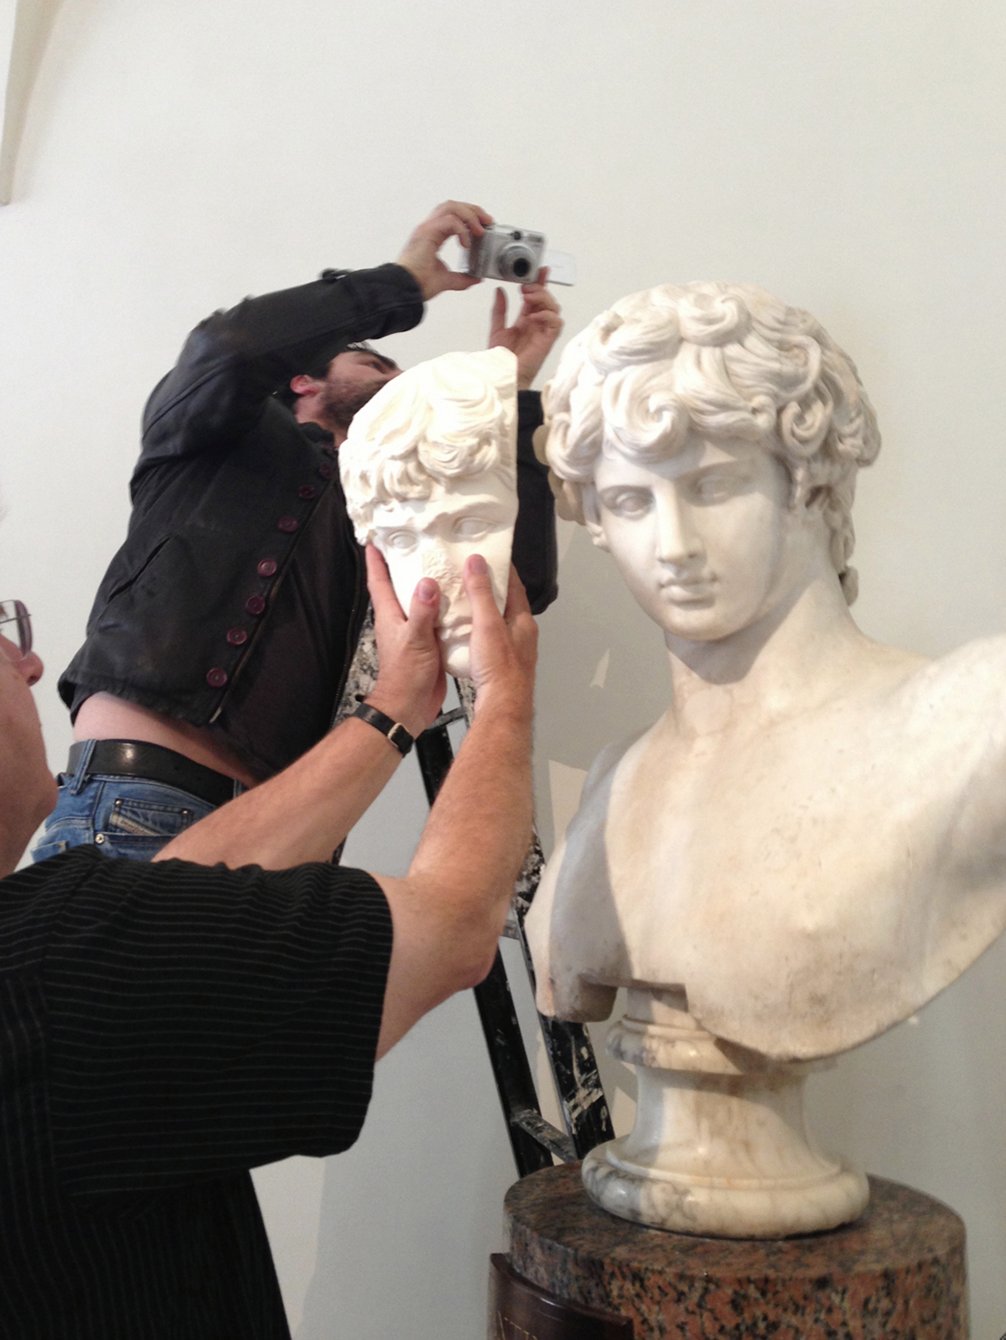 Jerry Podany, senior conservator of antiquities at the J. Paul Getty Museum, Los Angeles, displays a cast of the Art Institute of Chicago’s Fragment of a Portrait Head of Antinous